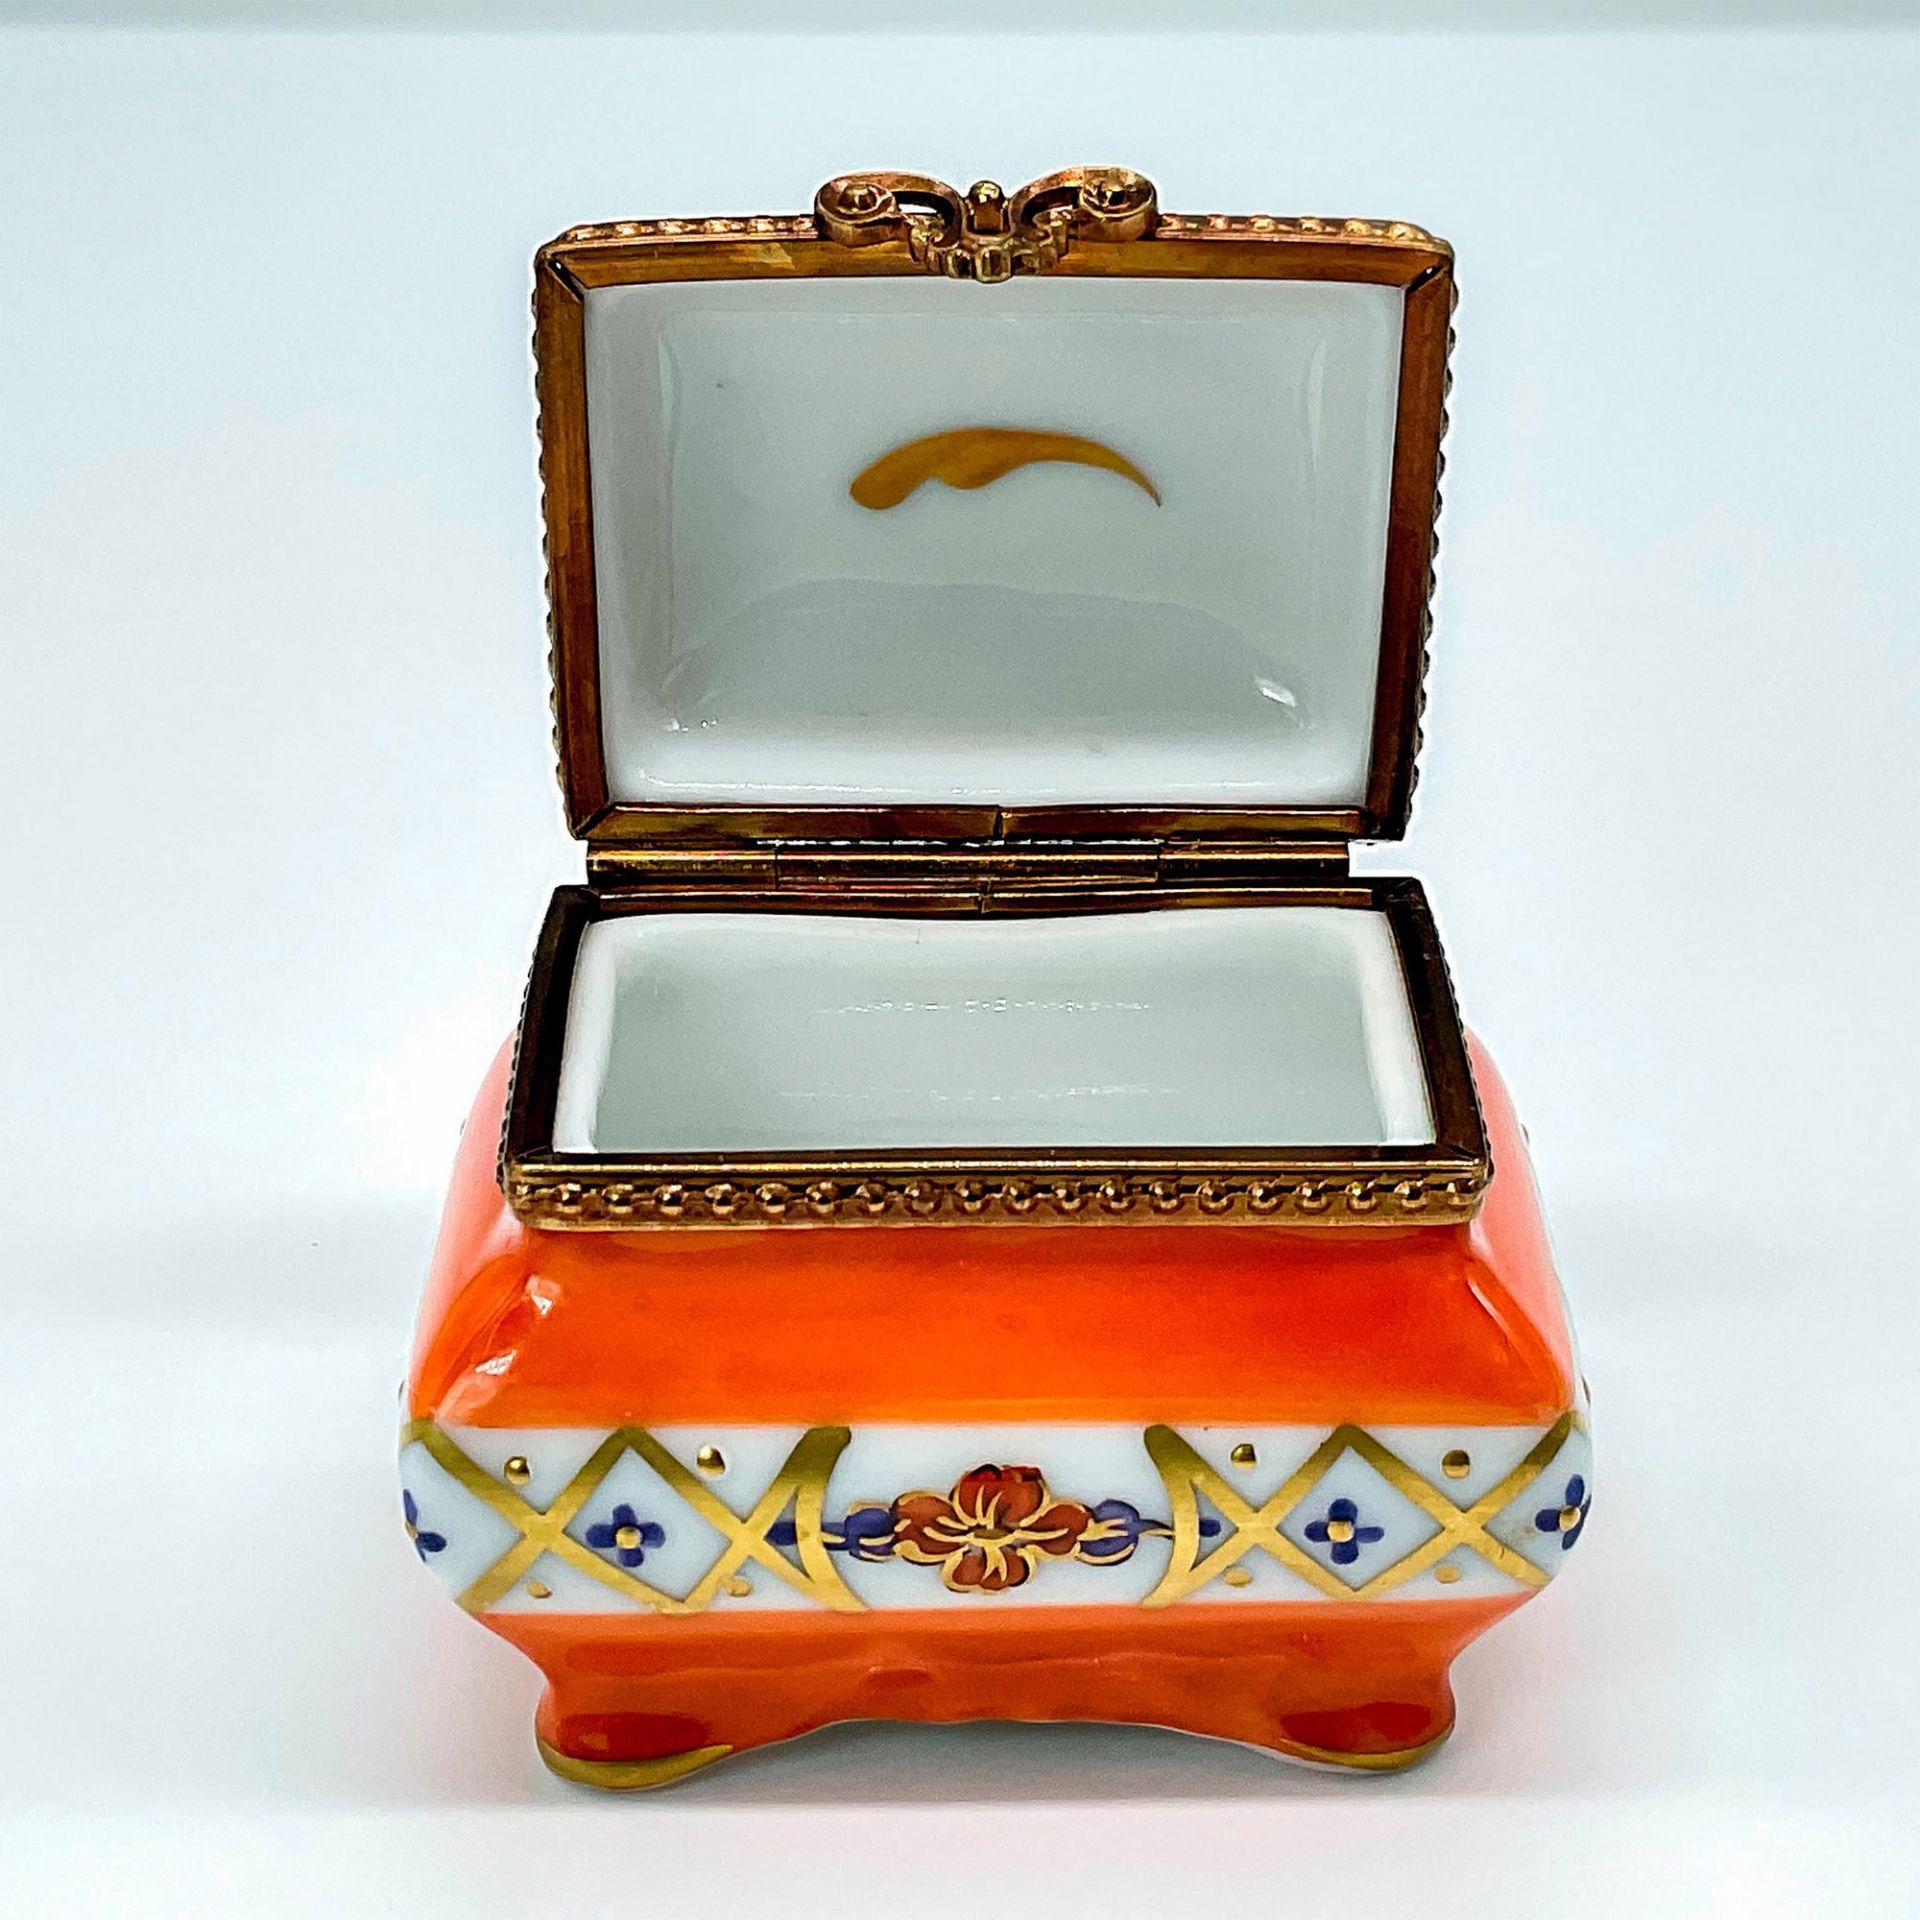 Rochard Limoges Hand Painted Chest-Shaped Box - Image 2 of 3